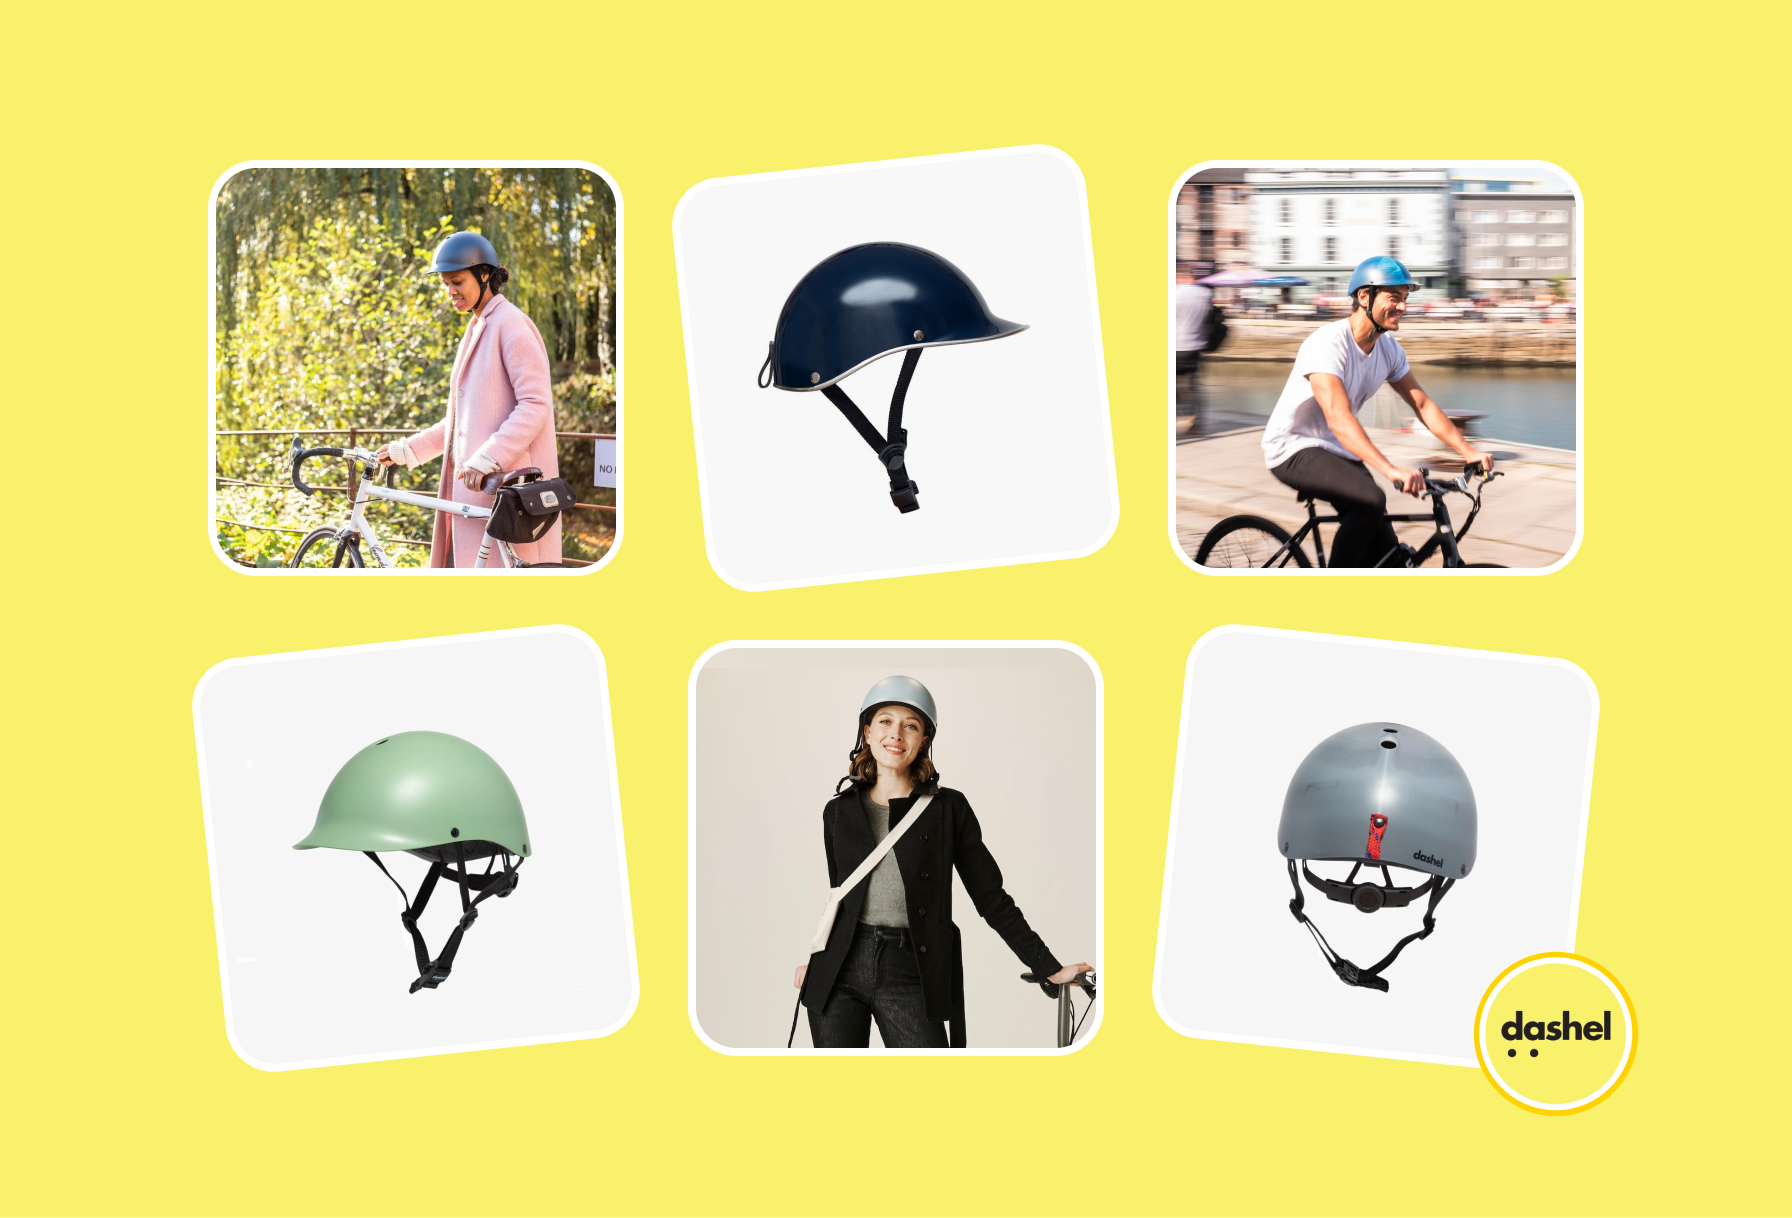 Dashel Helmets: Empowering Cyclists with Confidence